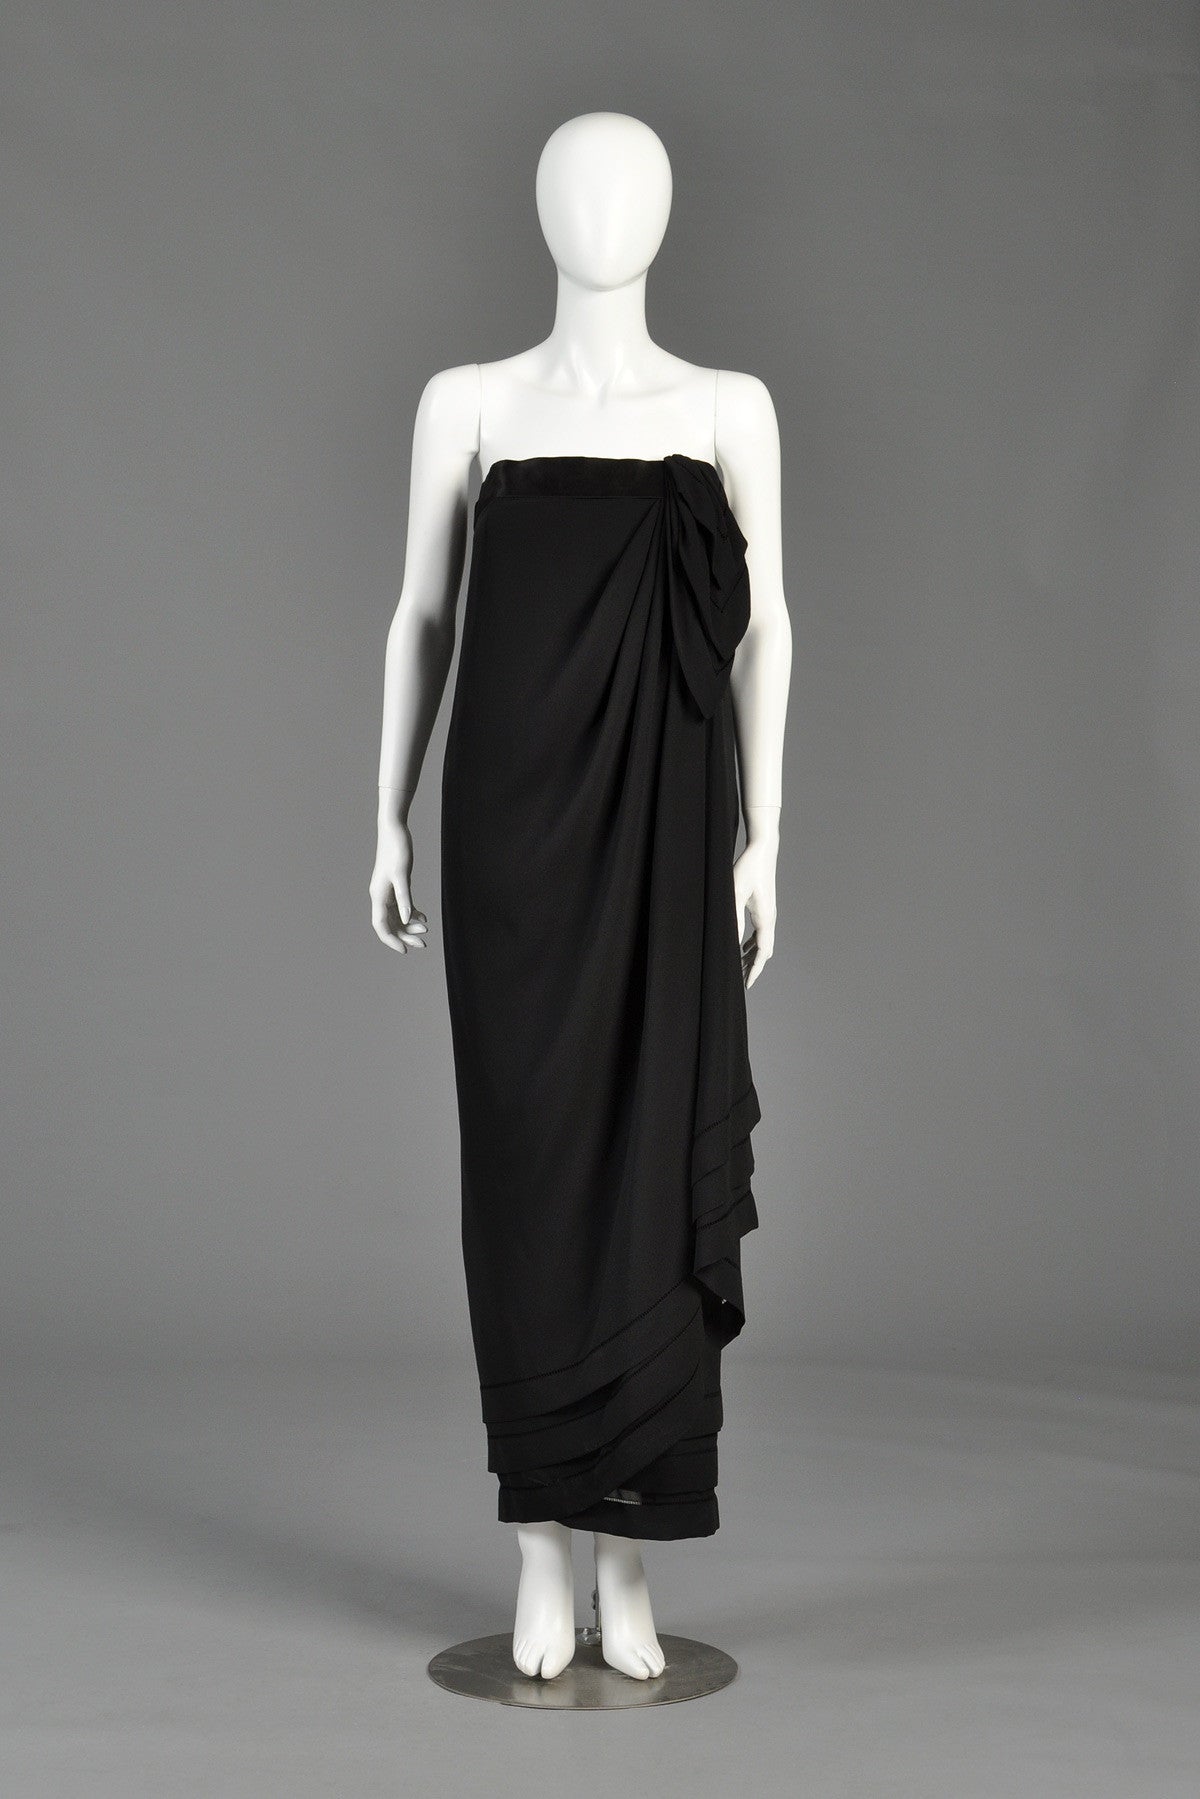 Late 1970s Guy Laroche Haute Couture Draped Gown | BUSTOWN MODERN